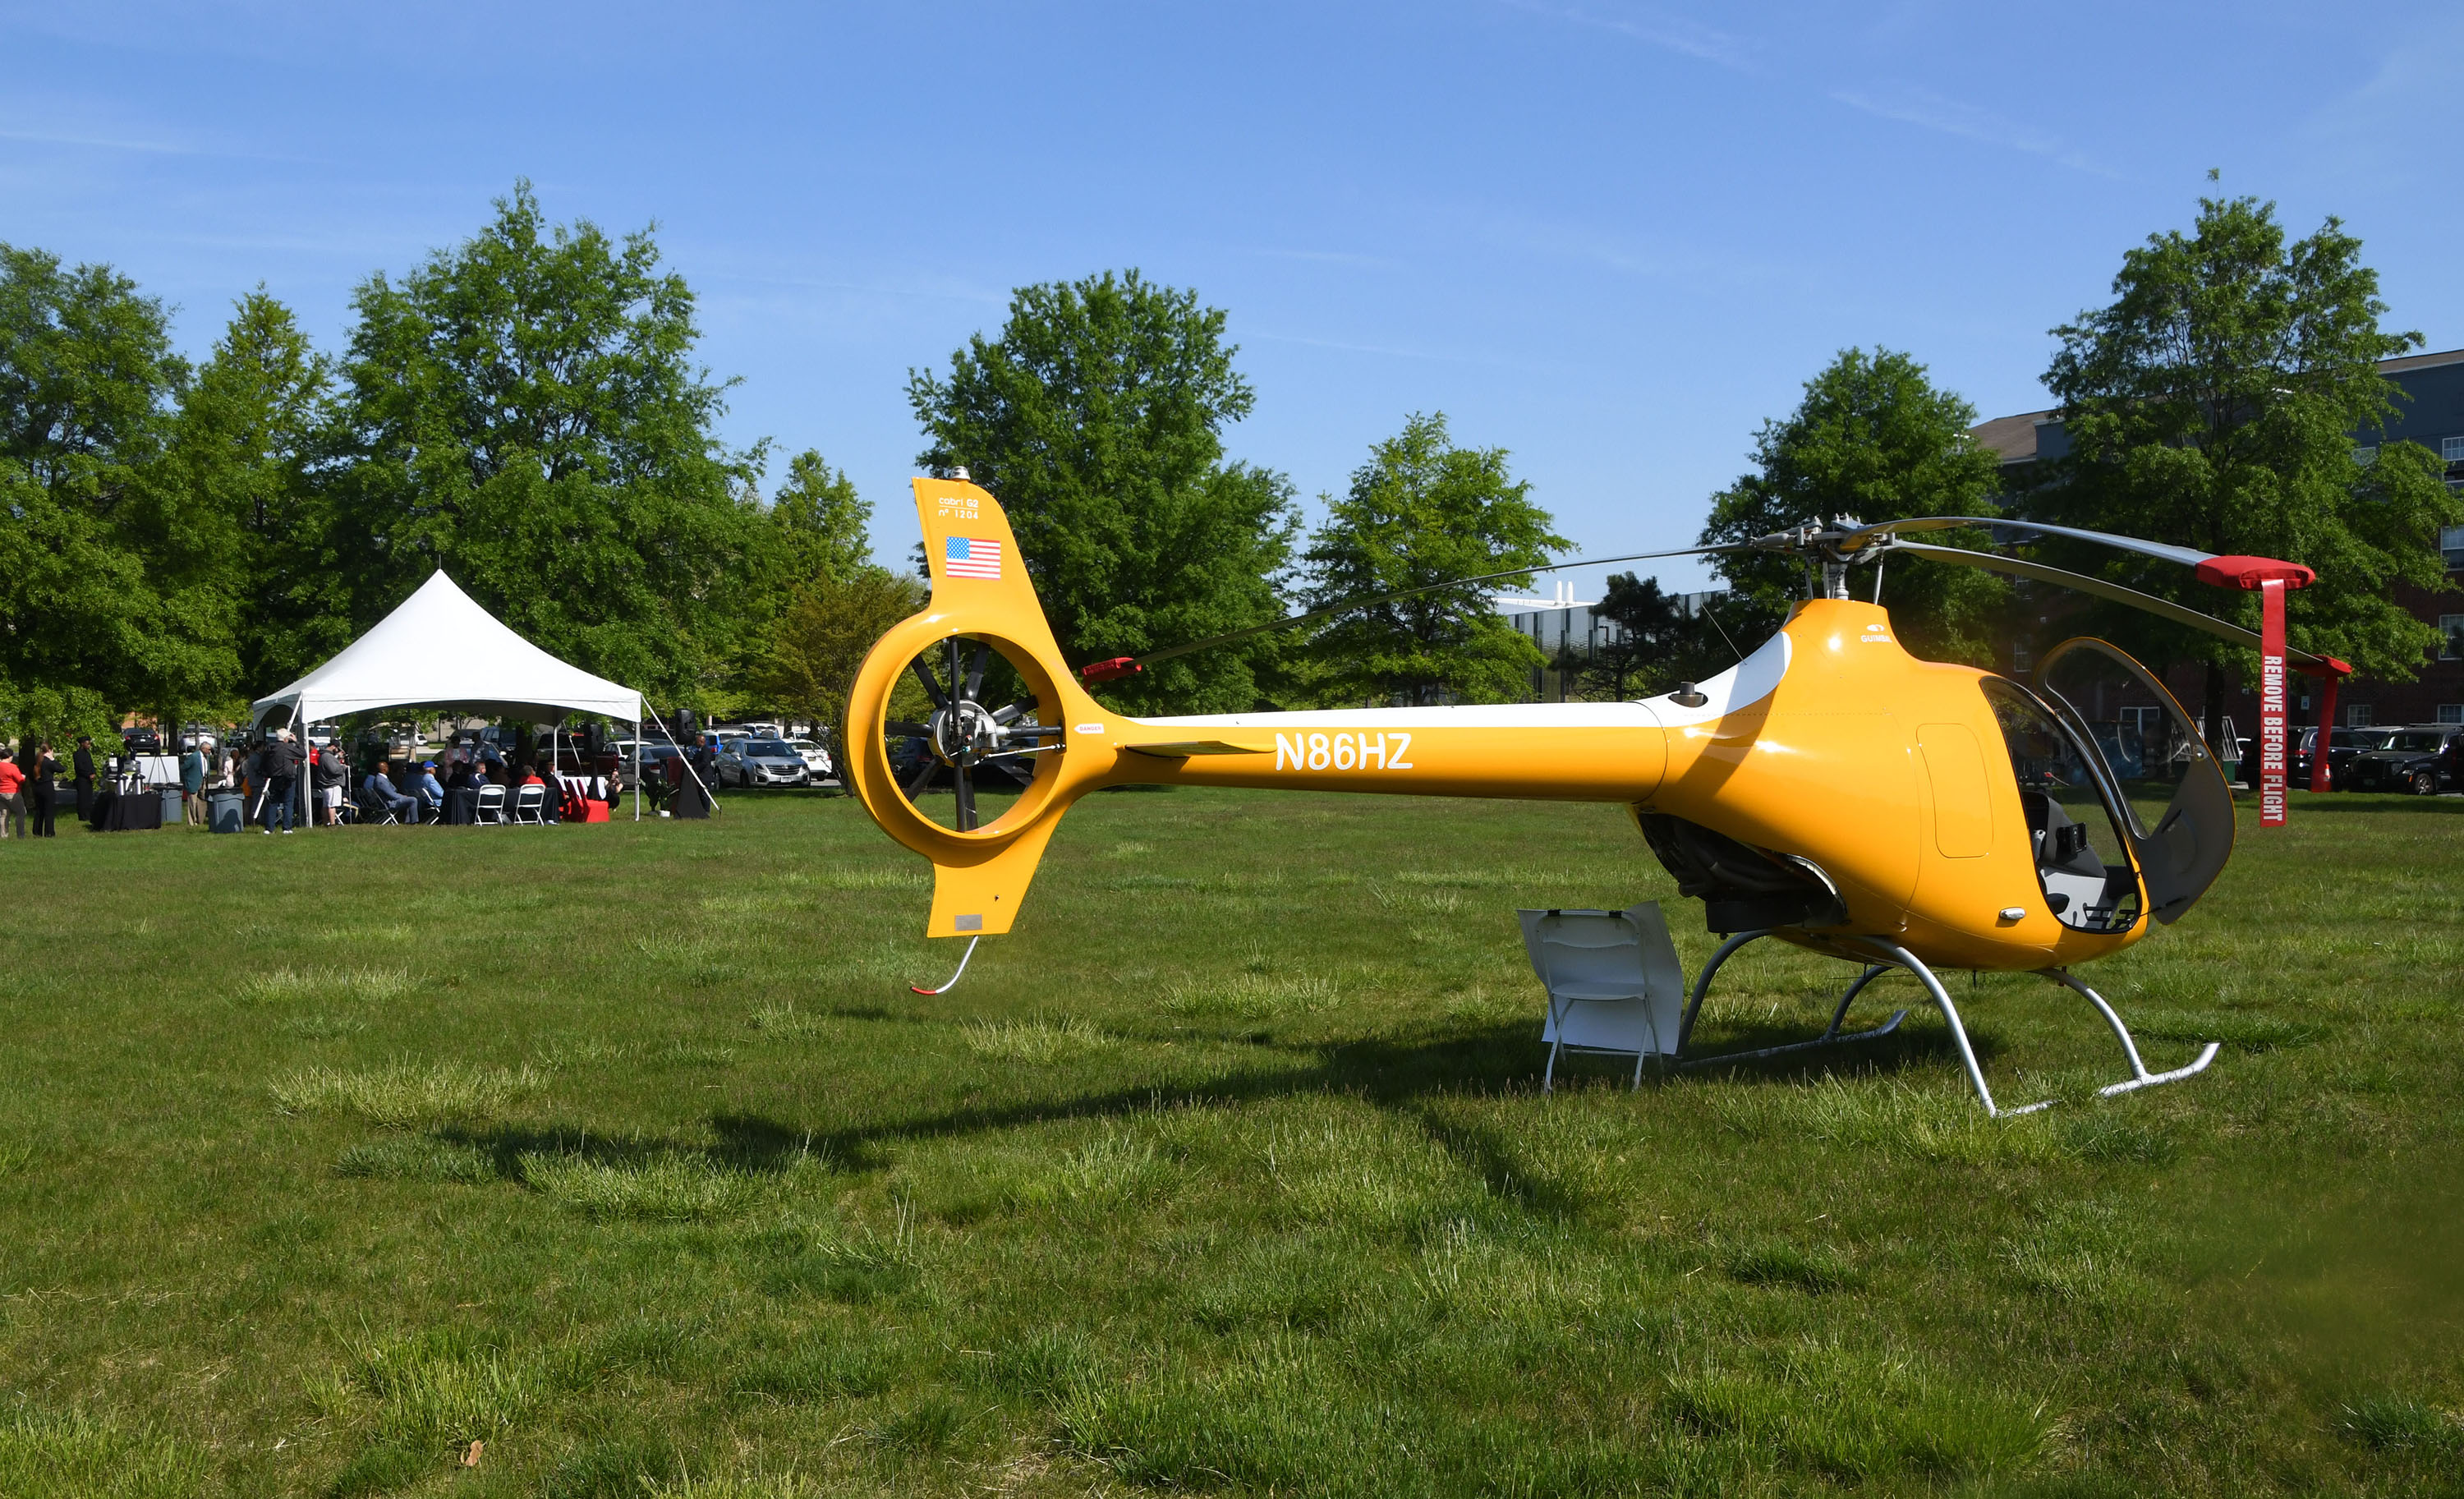 A Cabri G2 Helicopter, which will be used for the training program, sit in the field near the media event.